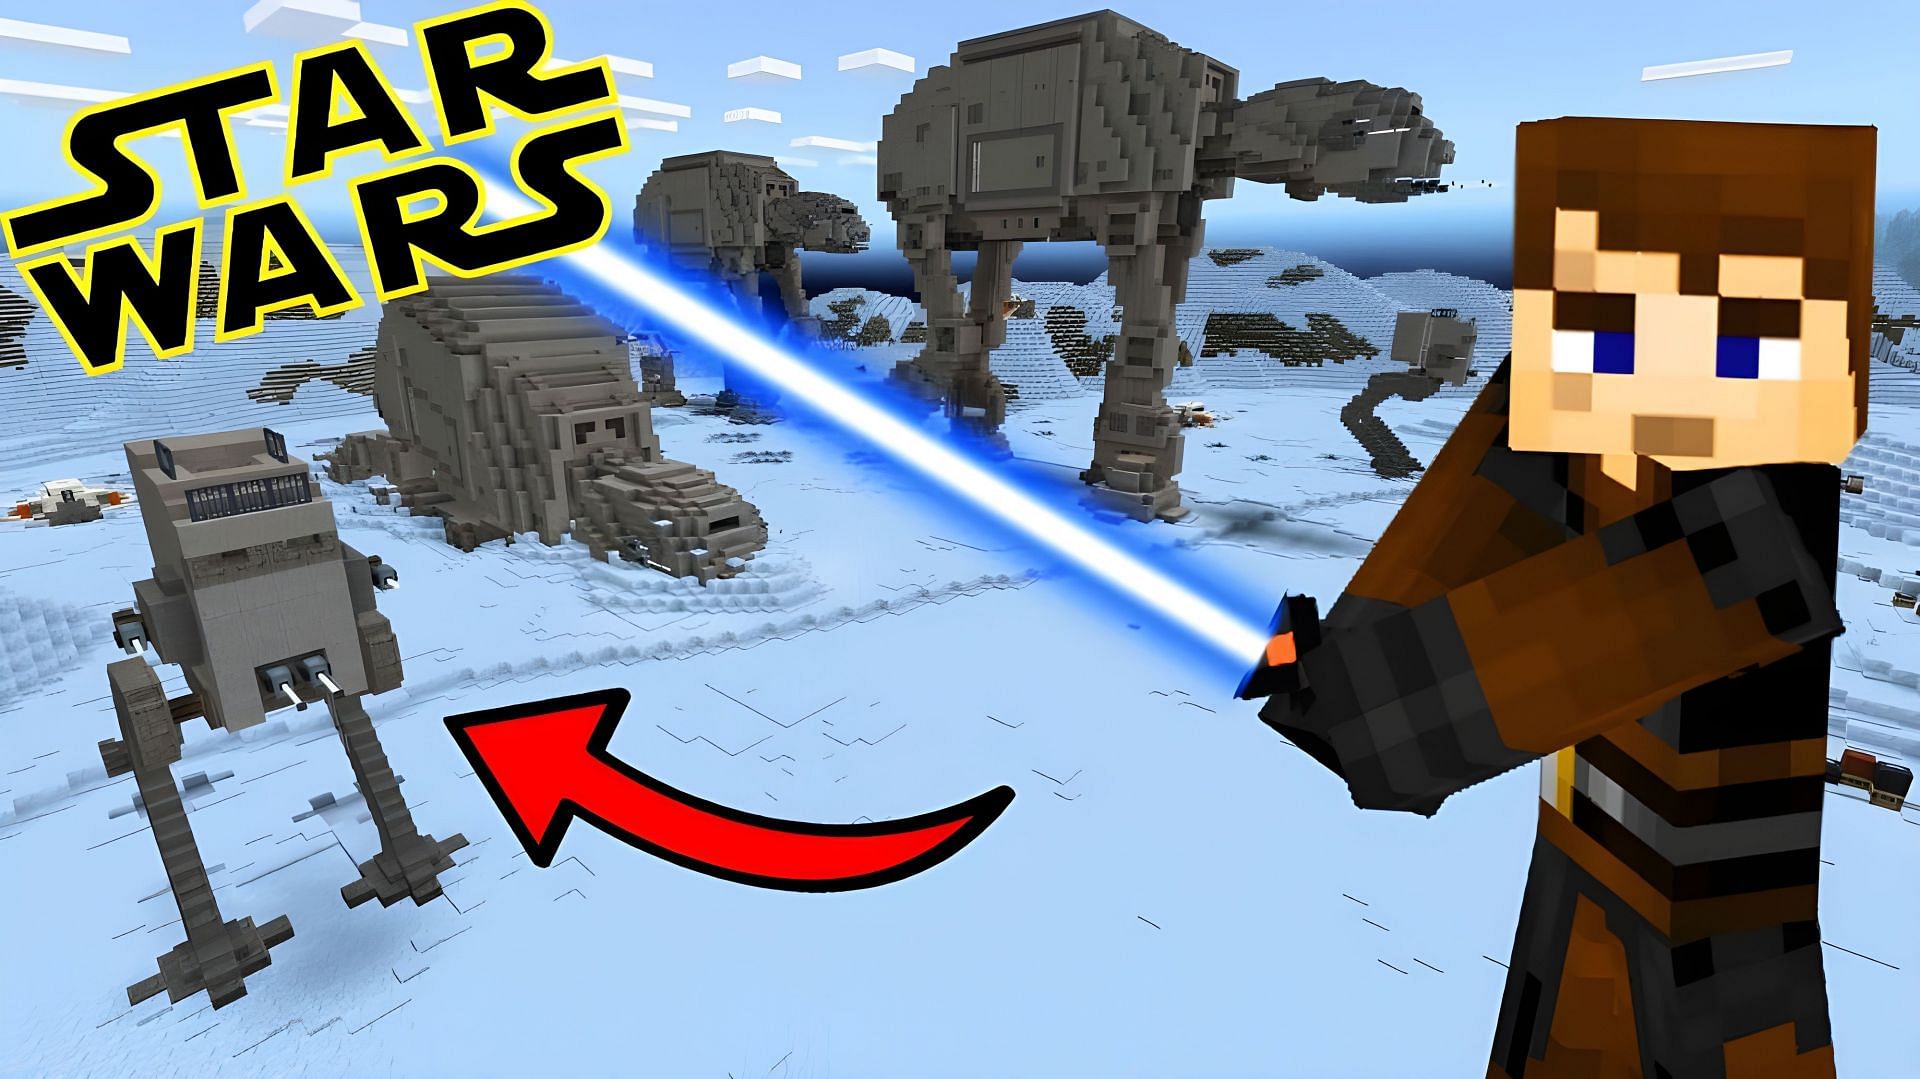 These Minecraft builds will be amazing for Star Wars fans (Image via Youtube/DaleyTactics)